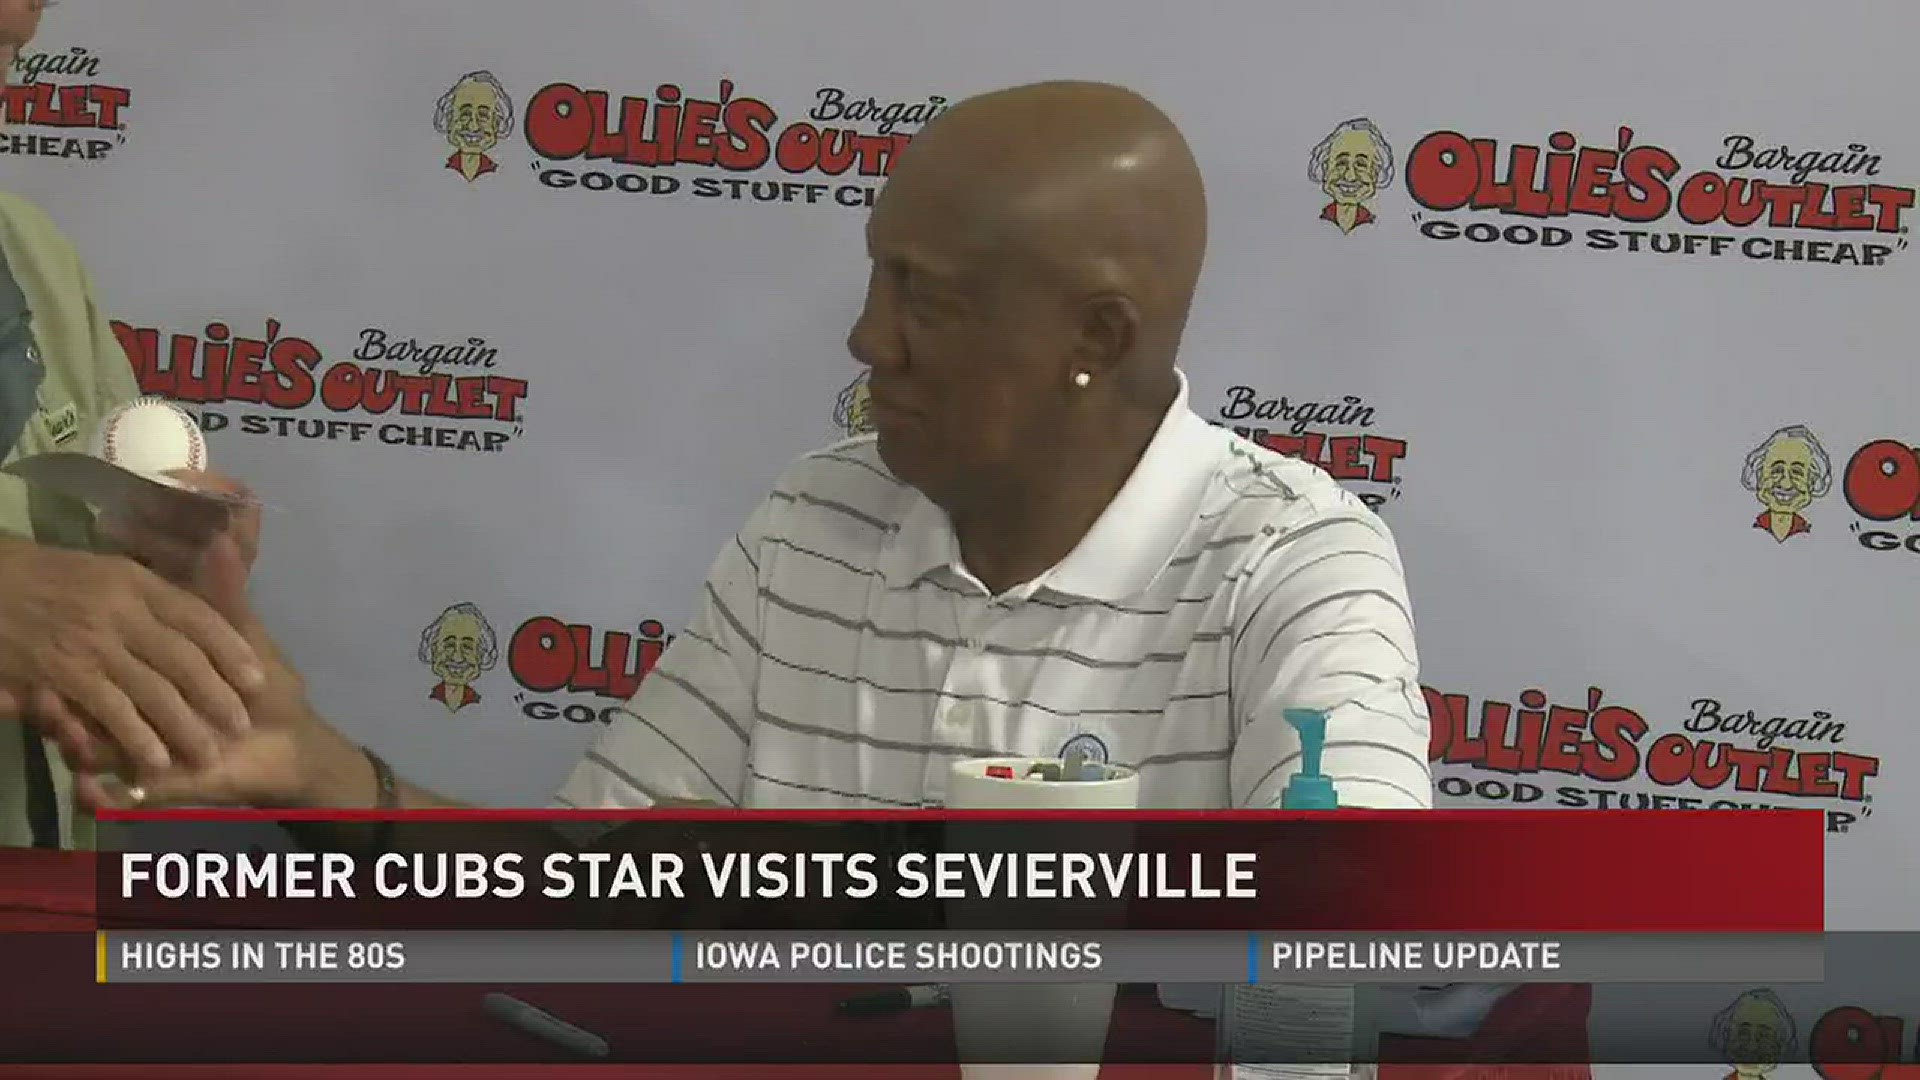 Former Chicago Cubs and Hall of Fame pitcher Fergie Jenkins is in East Tennessee ahead of Wednesday night's World Series Game 7 between the Cubs and Cleveland Indians.